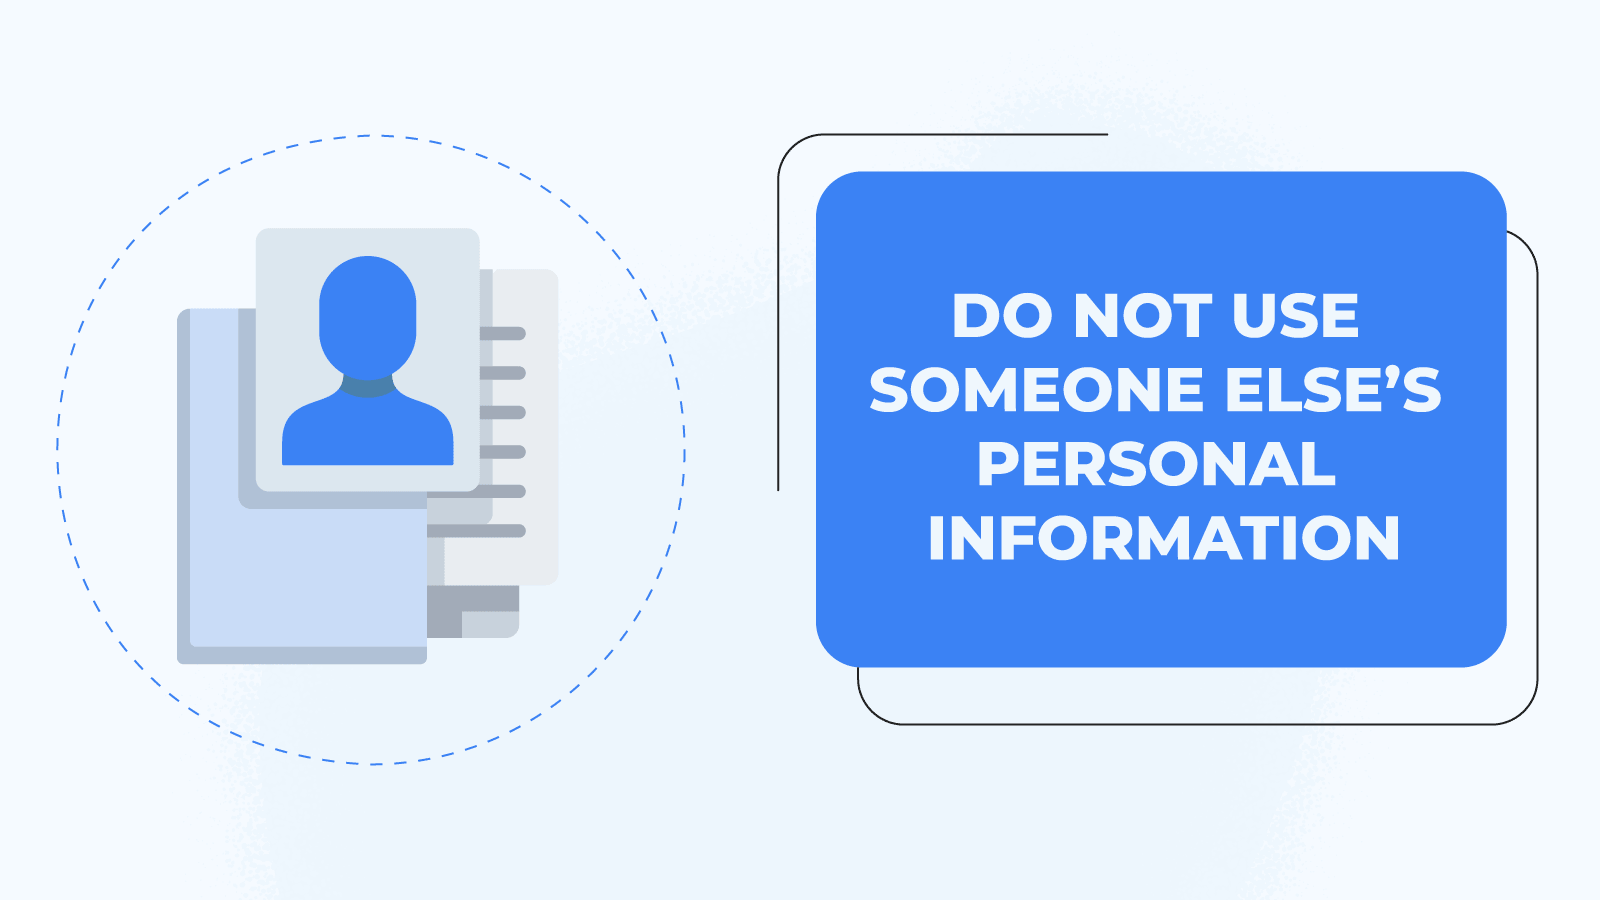 Do not use someone else’s personal information